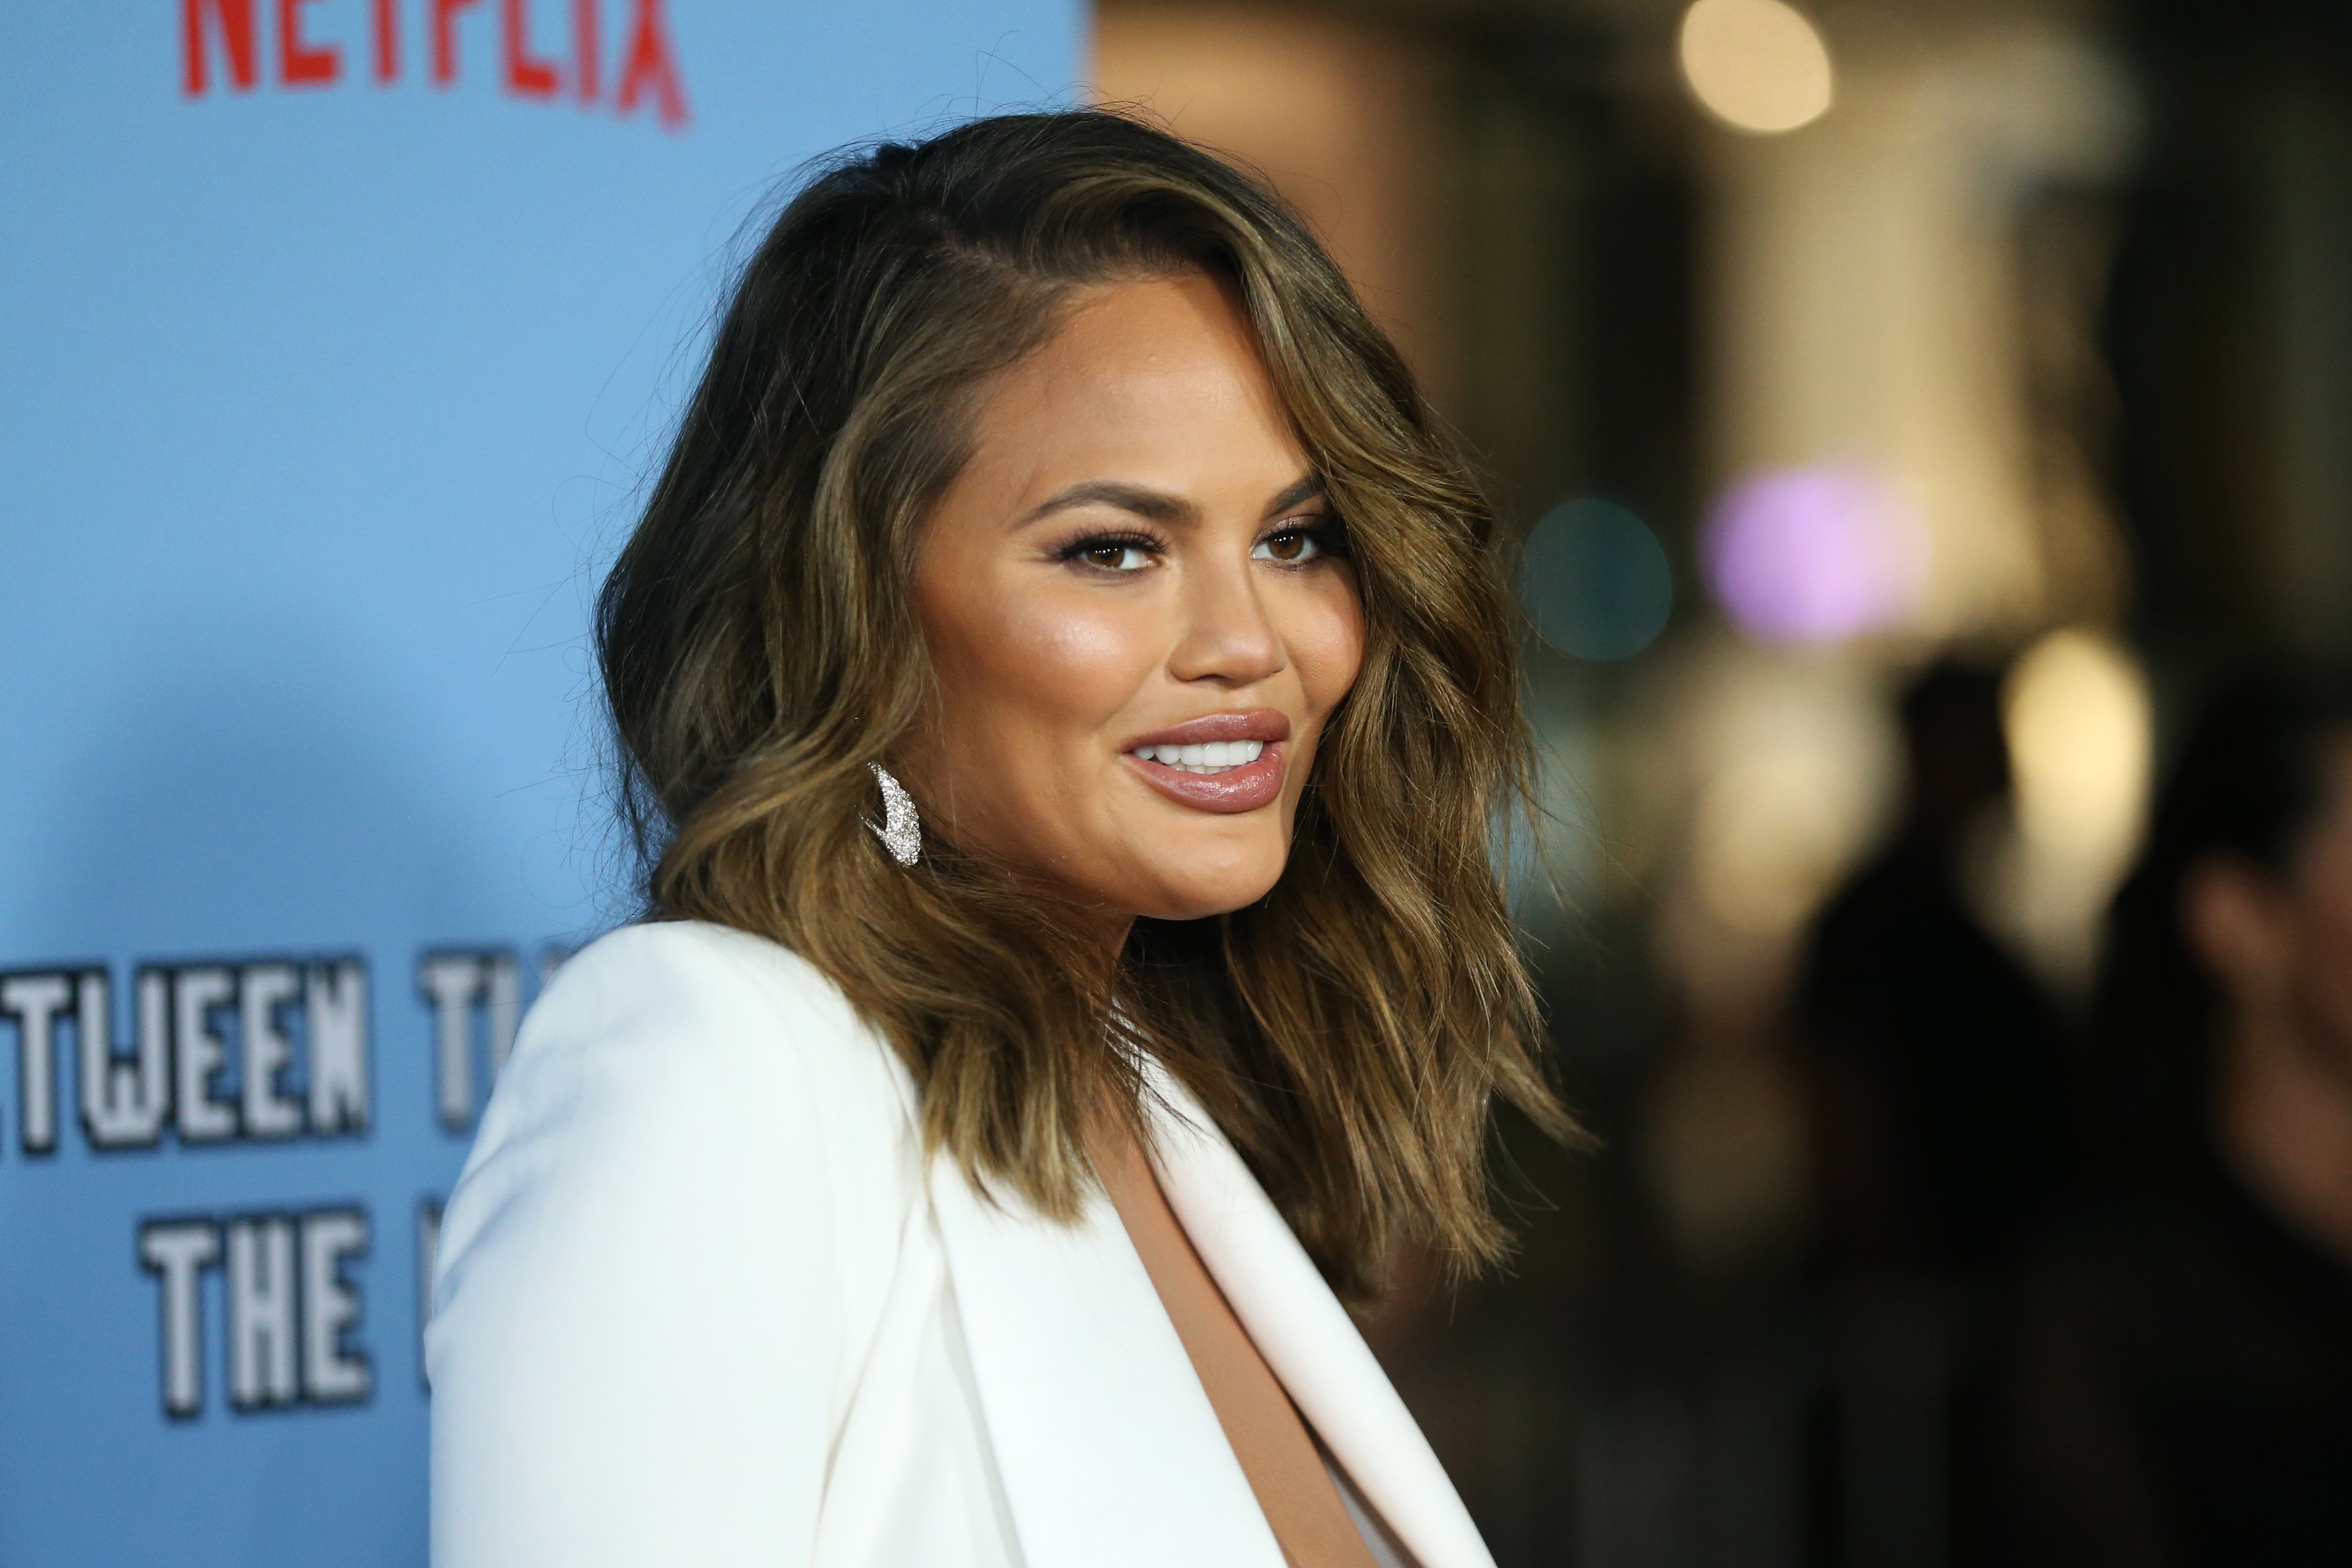 Chrissy Teigen attends the LA premiere of Netflix's "Between Two Ferns: The Movie" on September 16, 2019, in Hollywood, California. | Source: Getty Images.